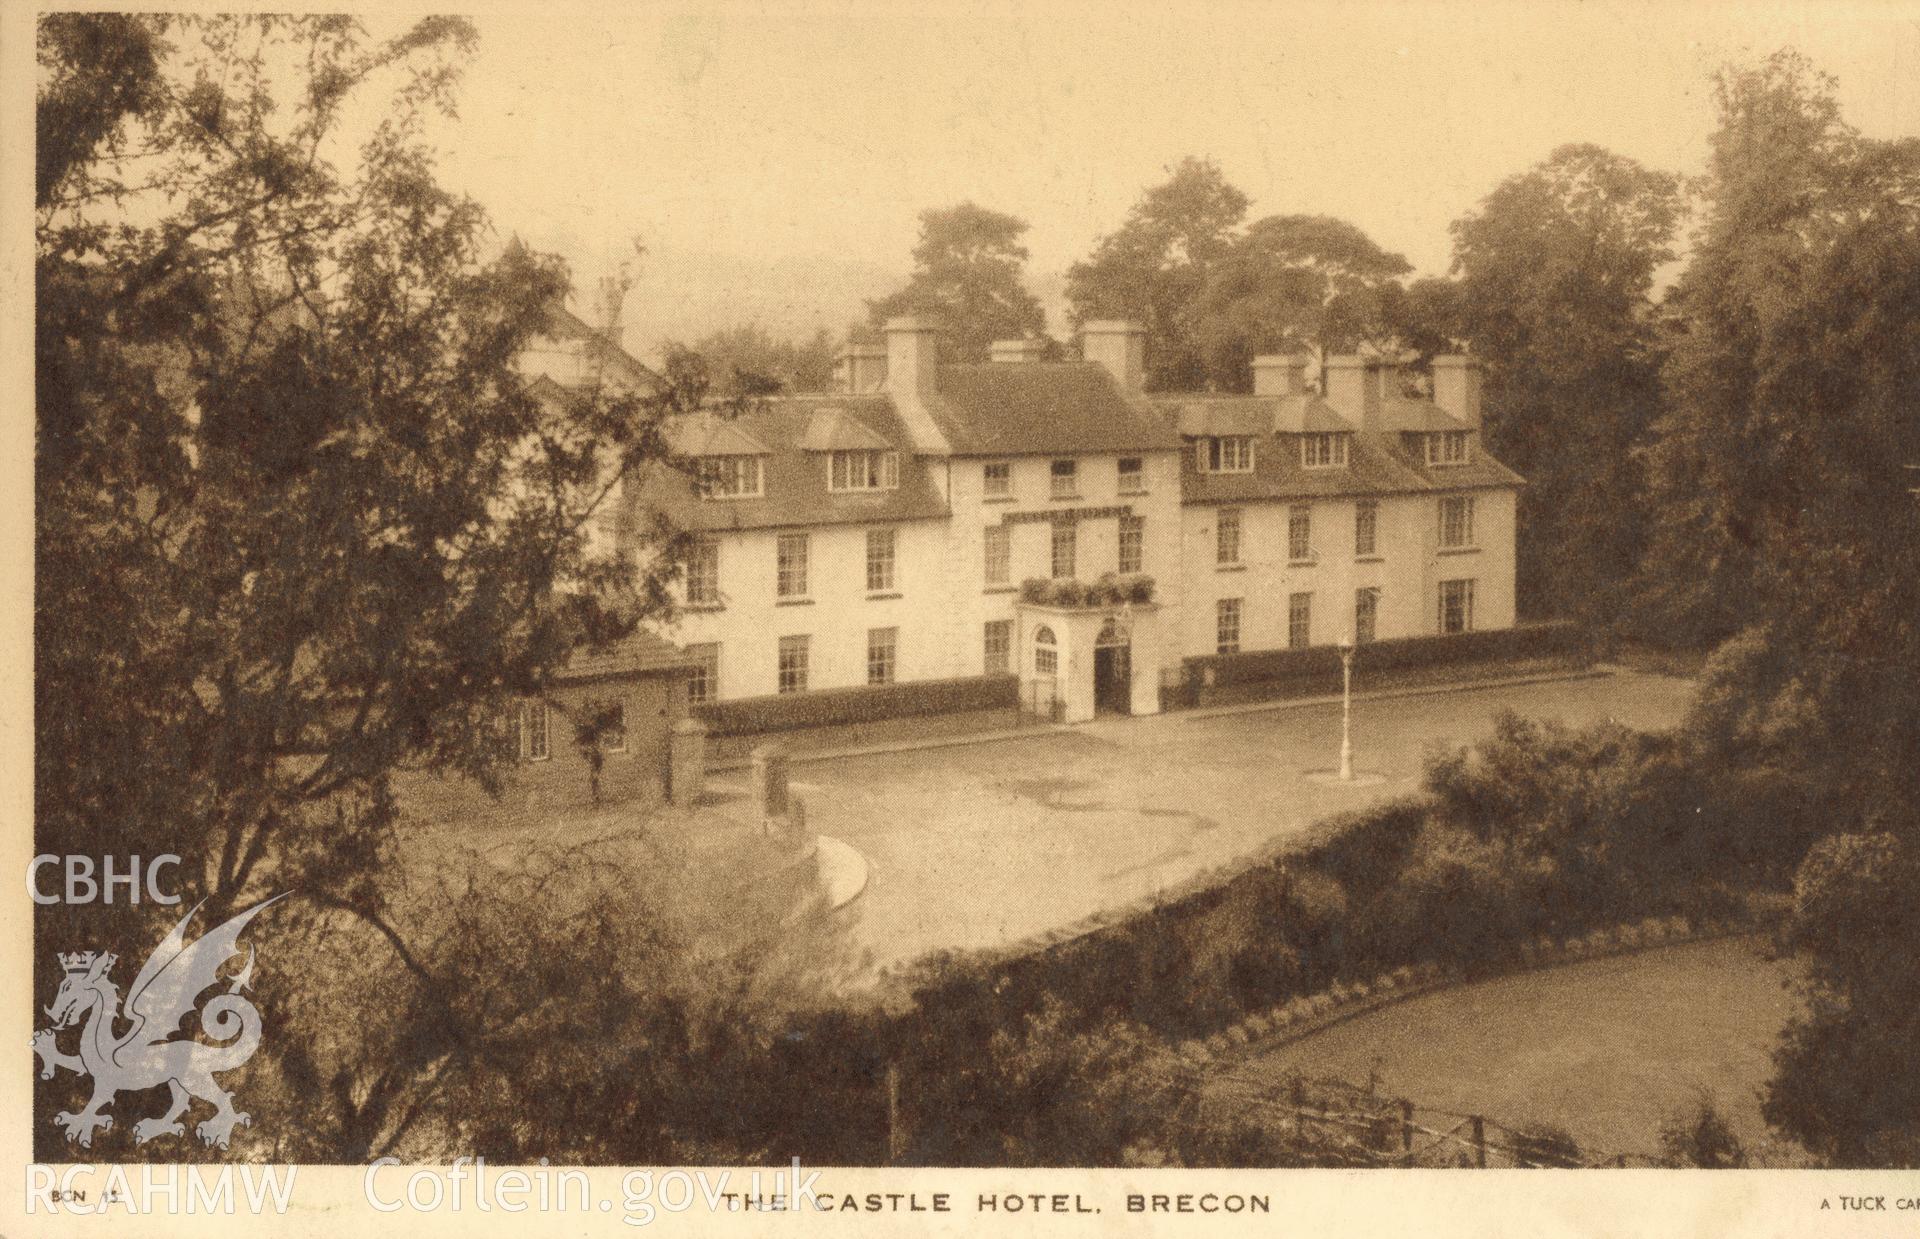 Digitised postcard image of Castle Hotel, Brecon, Raphael Tuck and Sons Ltd. Produced by Parks and Gardens Data Services, from an original item in the Peter Davis Collection at Parks and Gardens UK. We hold only web-resolution images of this collection, suitable for viewing on screen and for research purposes only. We do not hold the original images, or publication quality scans.